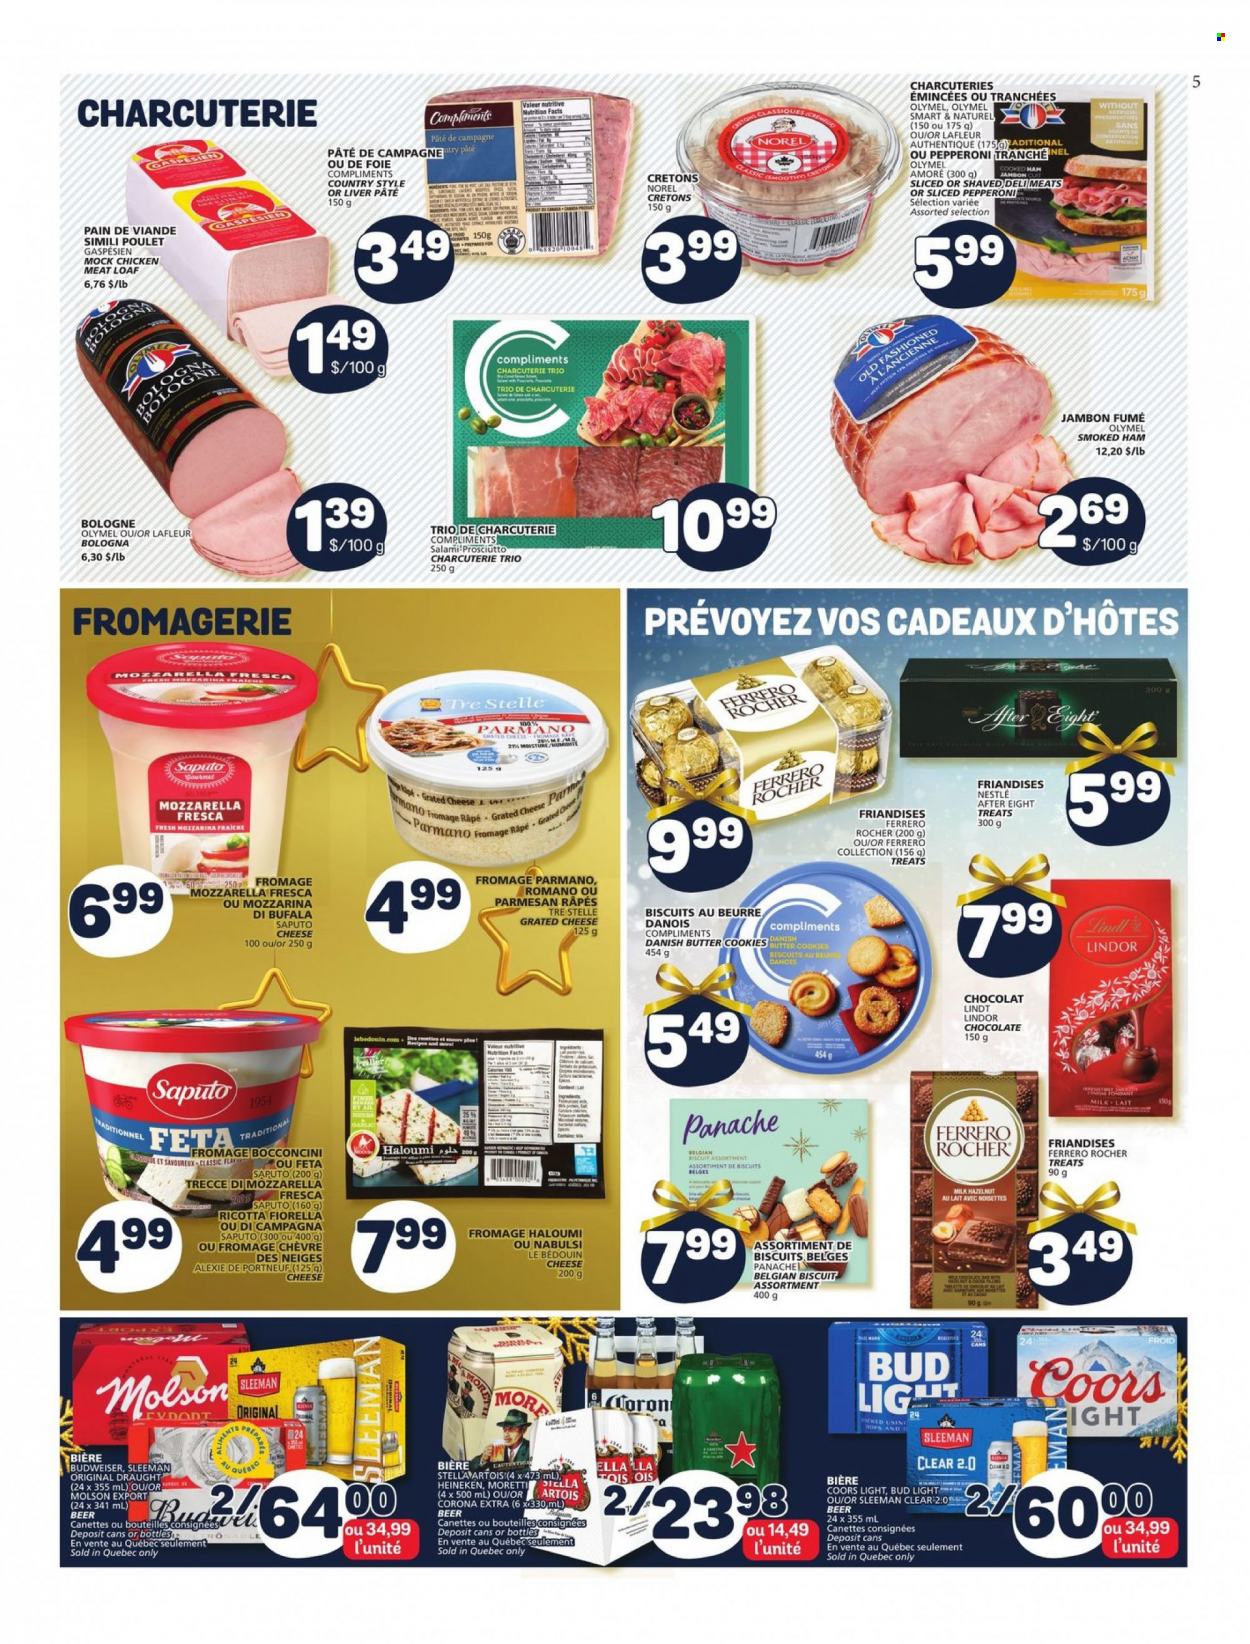 thumbnail - Marché Bonichoix Flyer - November 24, 2022 - November 30, 2022 - Sales products - cooked ham, salami, ham, prosciutto, smoked ham, bologna sausage, pepperoni, bocconcini, parmesan, cheese, grated cheese, feta, milk, cookies, chocolate, butter cookies, biscuit, After Eight, beer, Bud Light, Corona Extra, Heineken, chicken, Budweiser, mozzarella, Nestlé, ricotta, Stella Artois, Lindt, Lindor, Ferrero Rocher, Coors. Page 5.